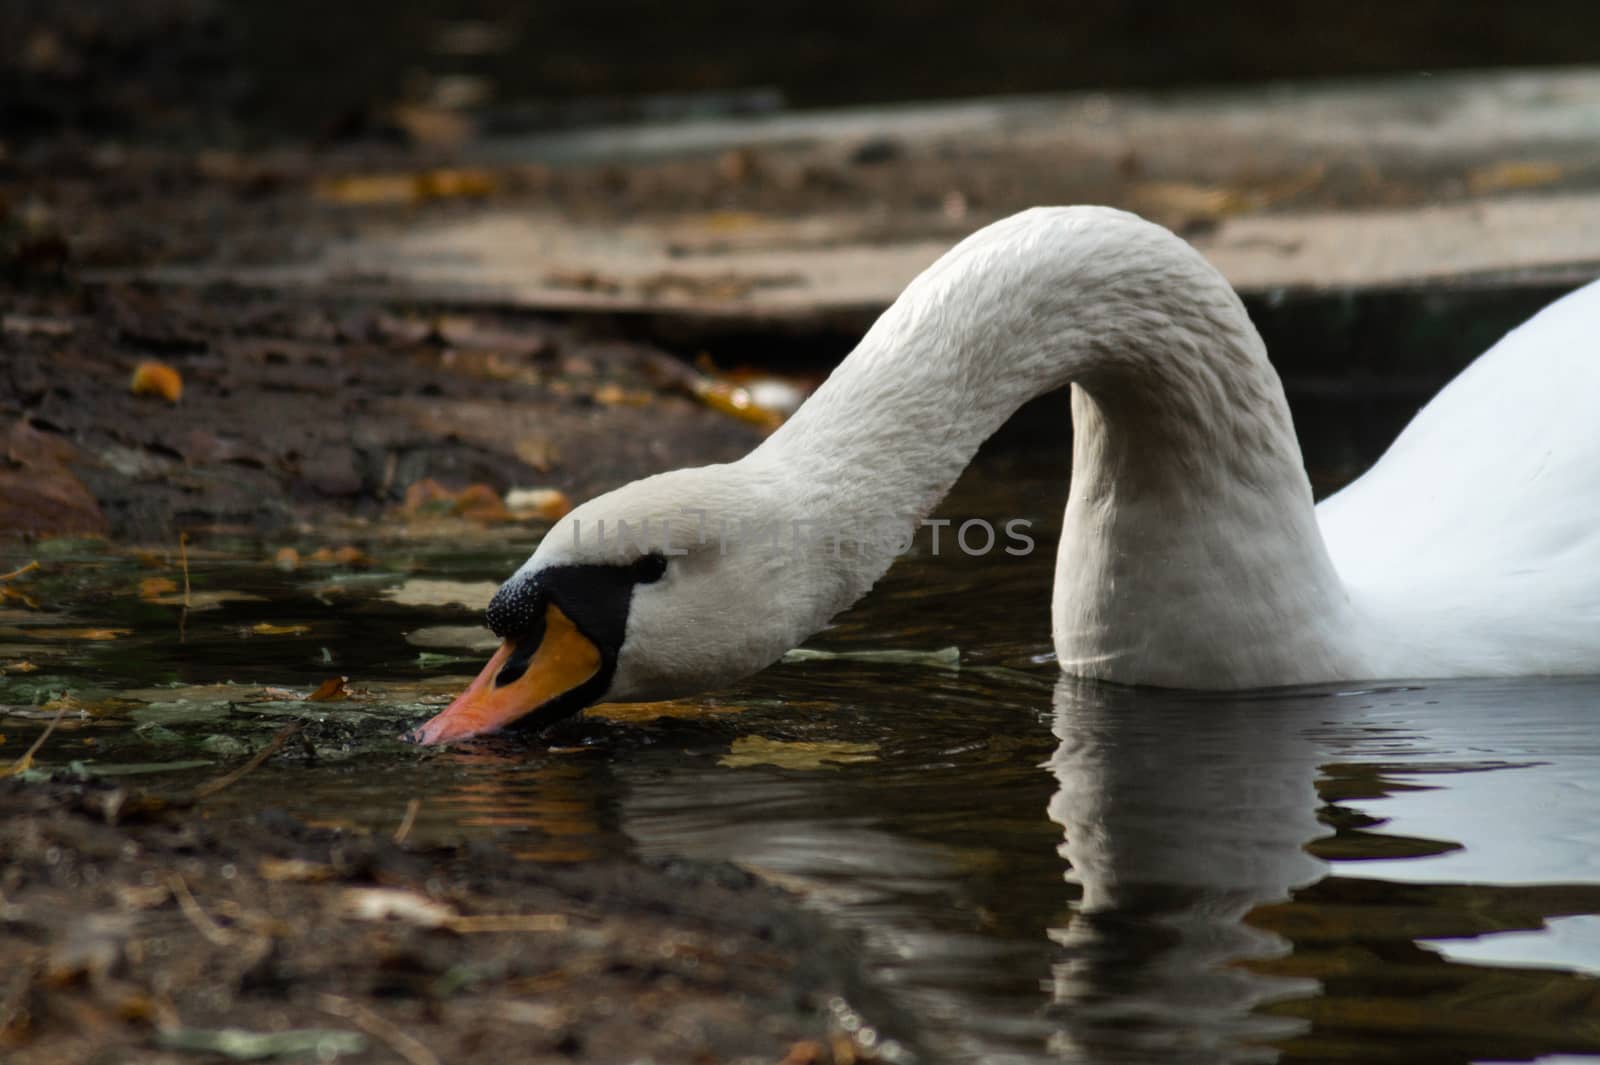 White swan with long neck eating in lake on autumn forest park. Closeup view with blurred background.